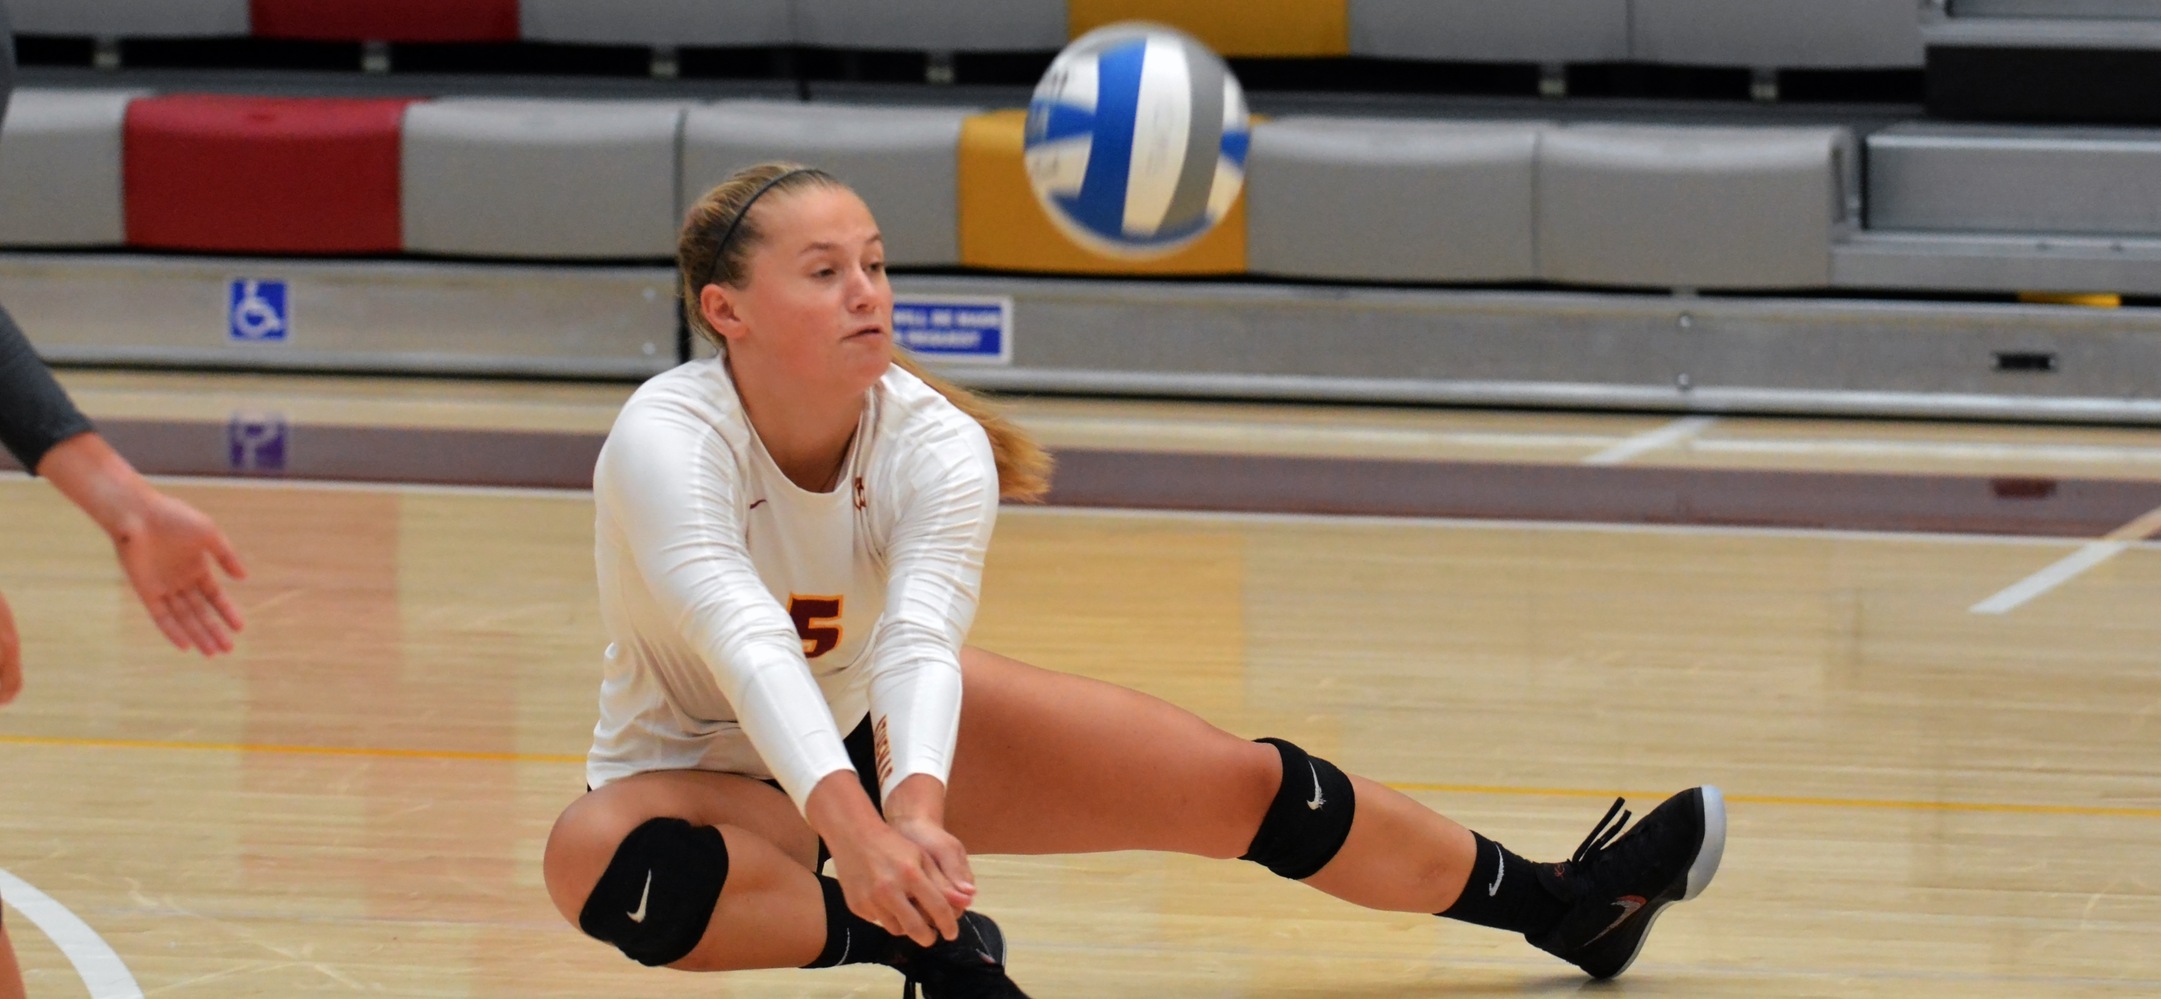 Sarah Tritschler was named to the Pacific Coast Classic All-Tournament team after 59 digs on Saturday